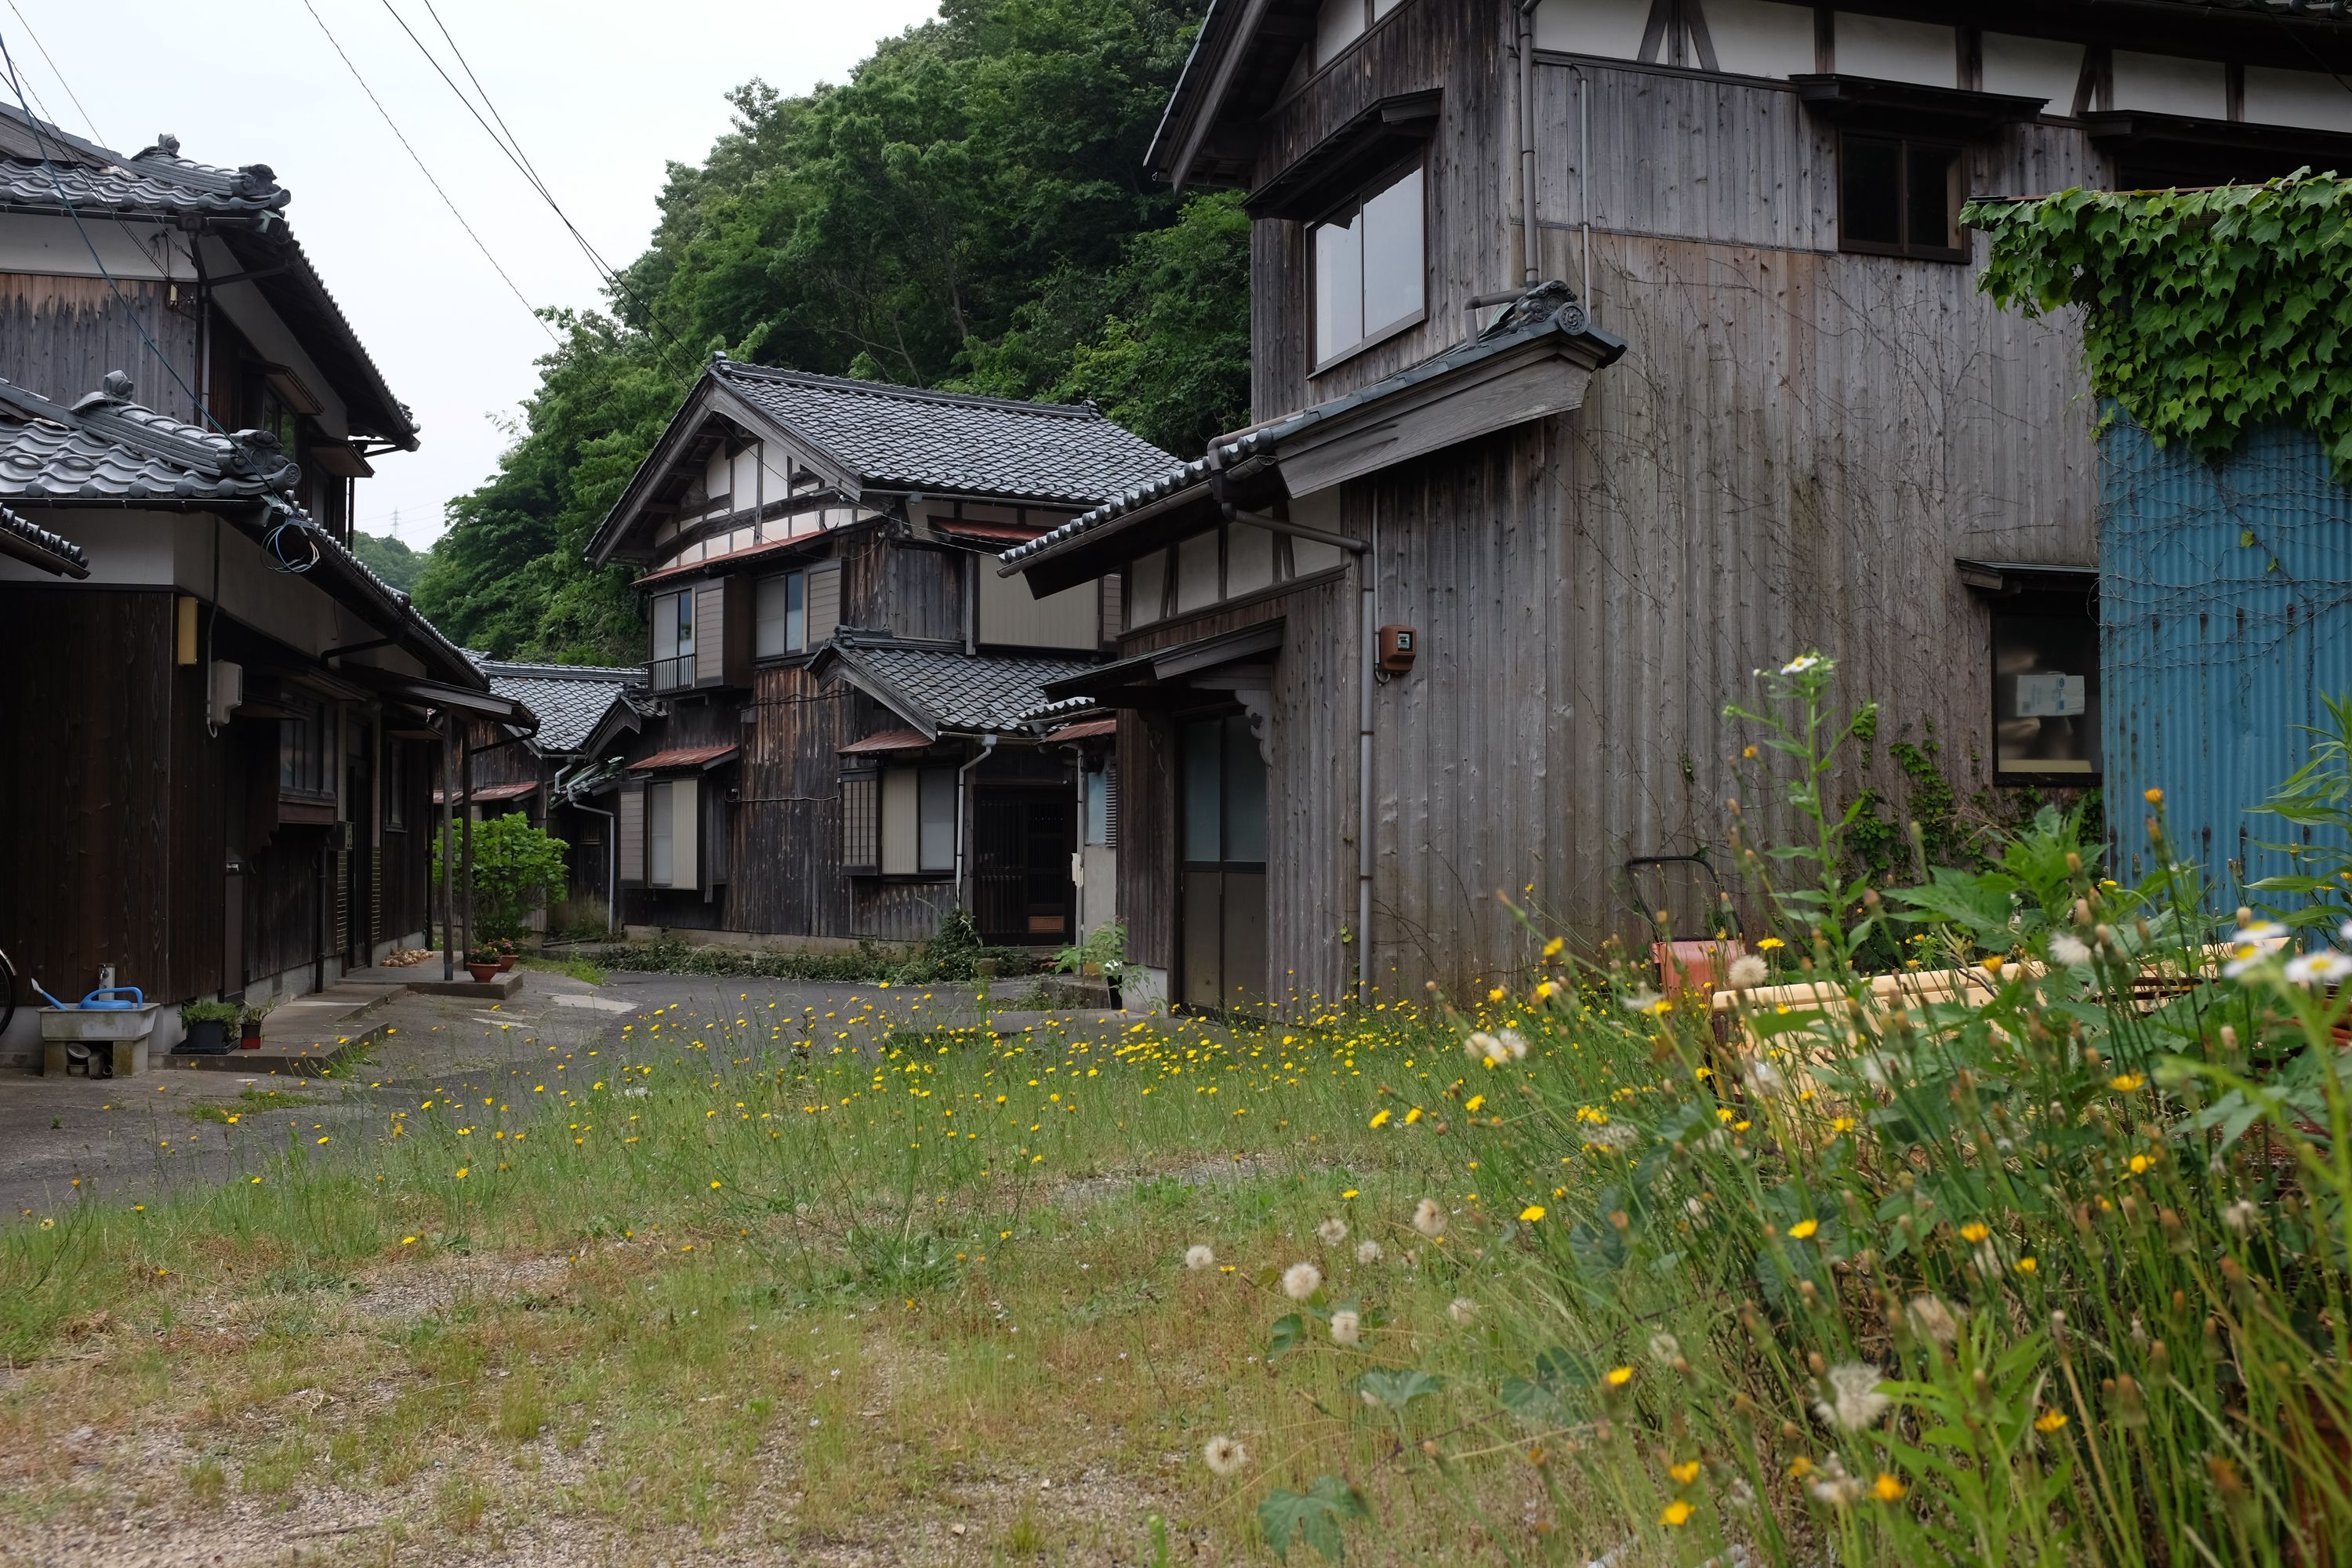 Old wooden houses clustered on a village street.